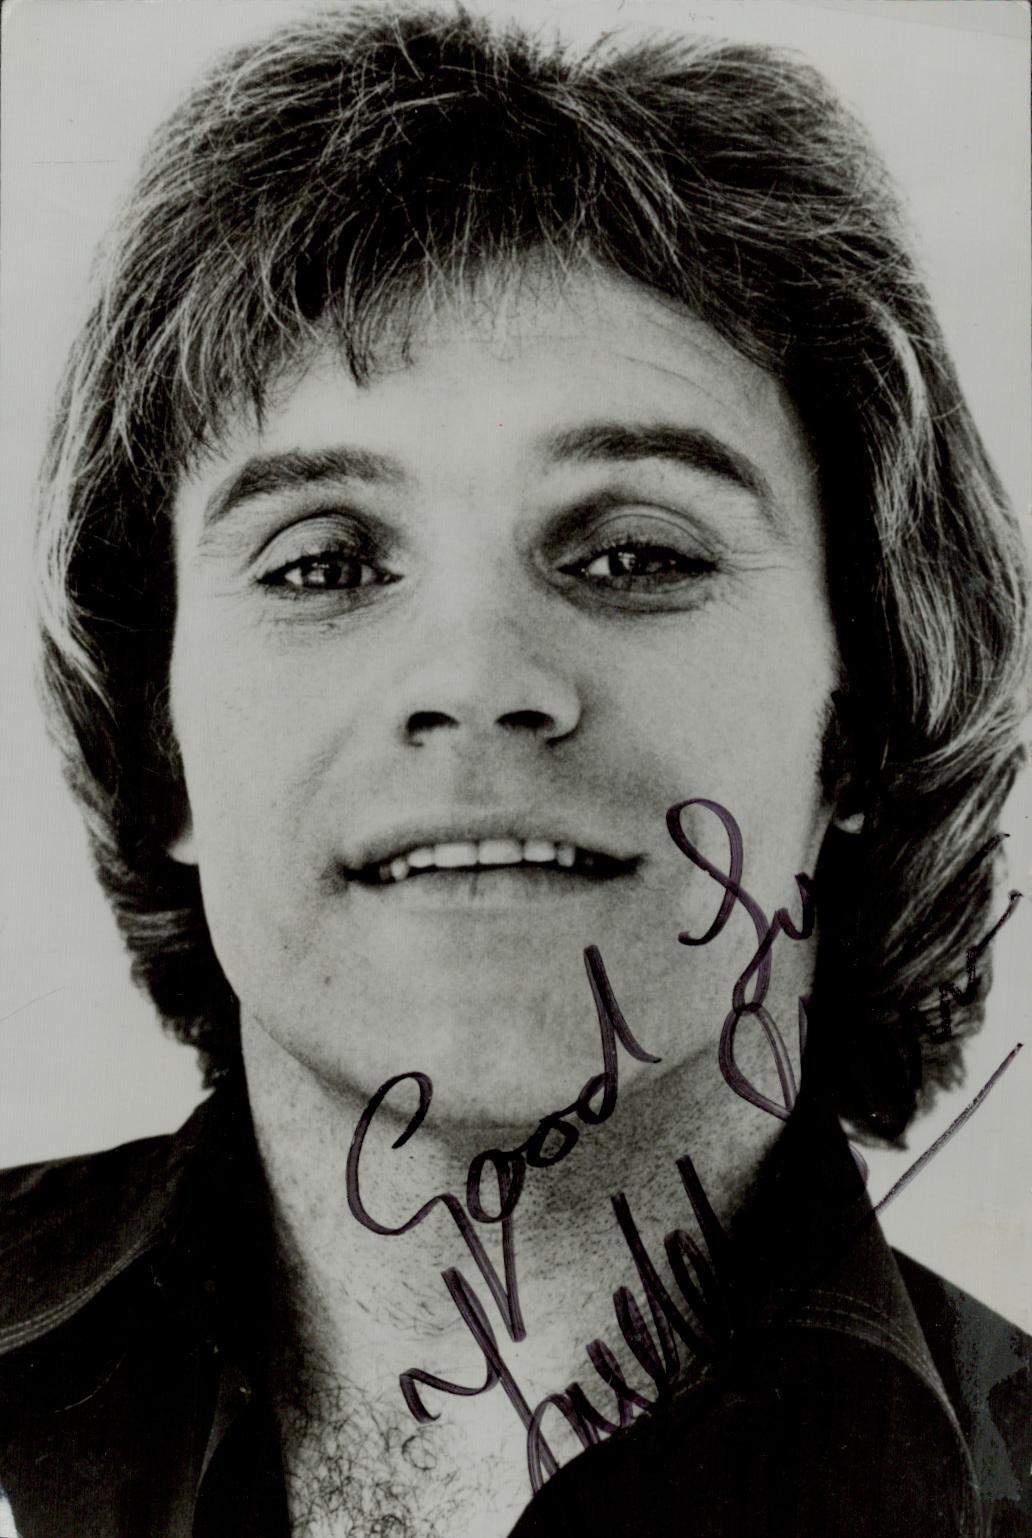 Freddie Starr signed 5x3 inch approx. black and white photo. Good Condition. All autographs come